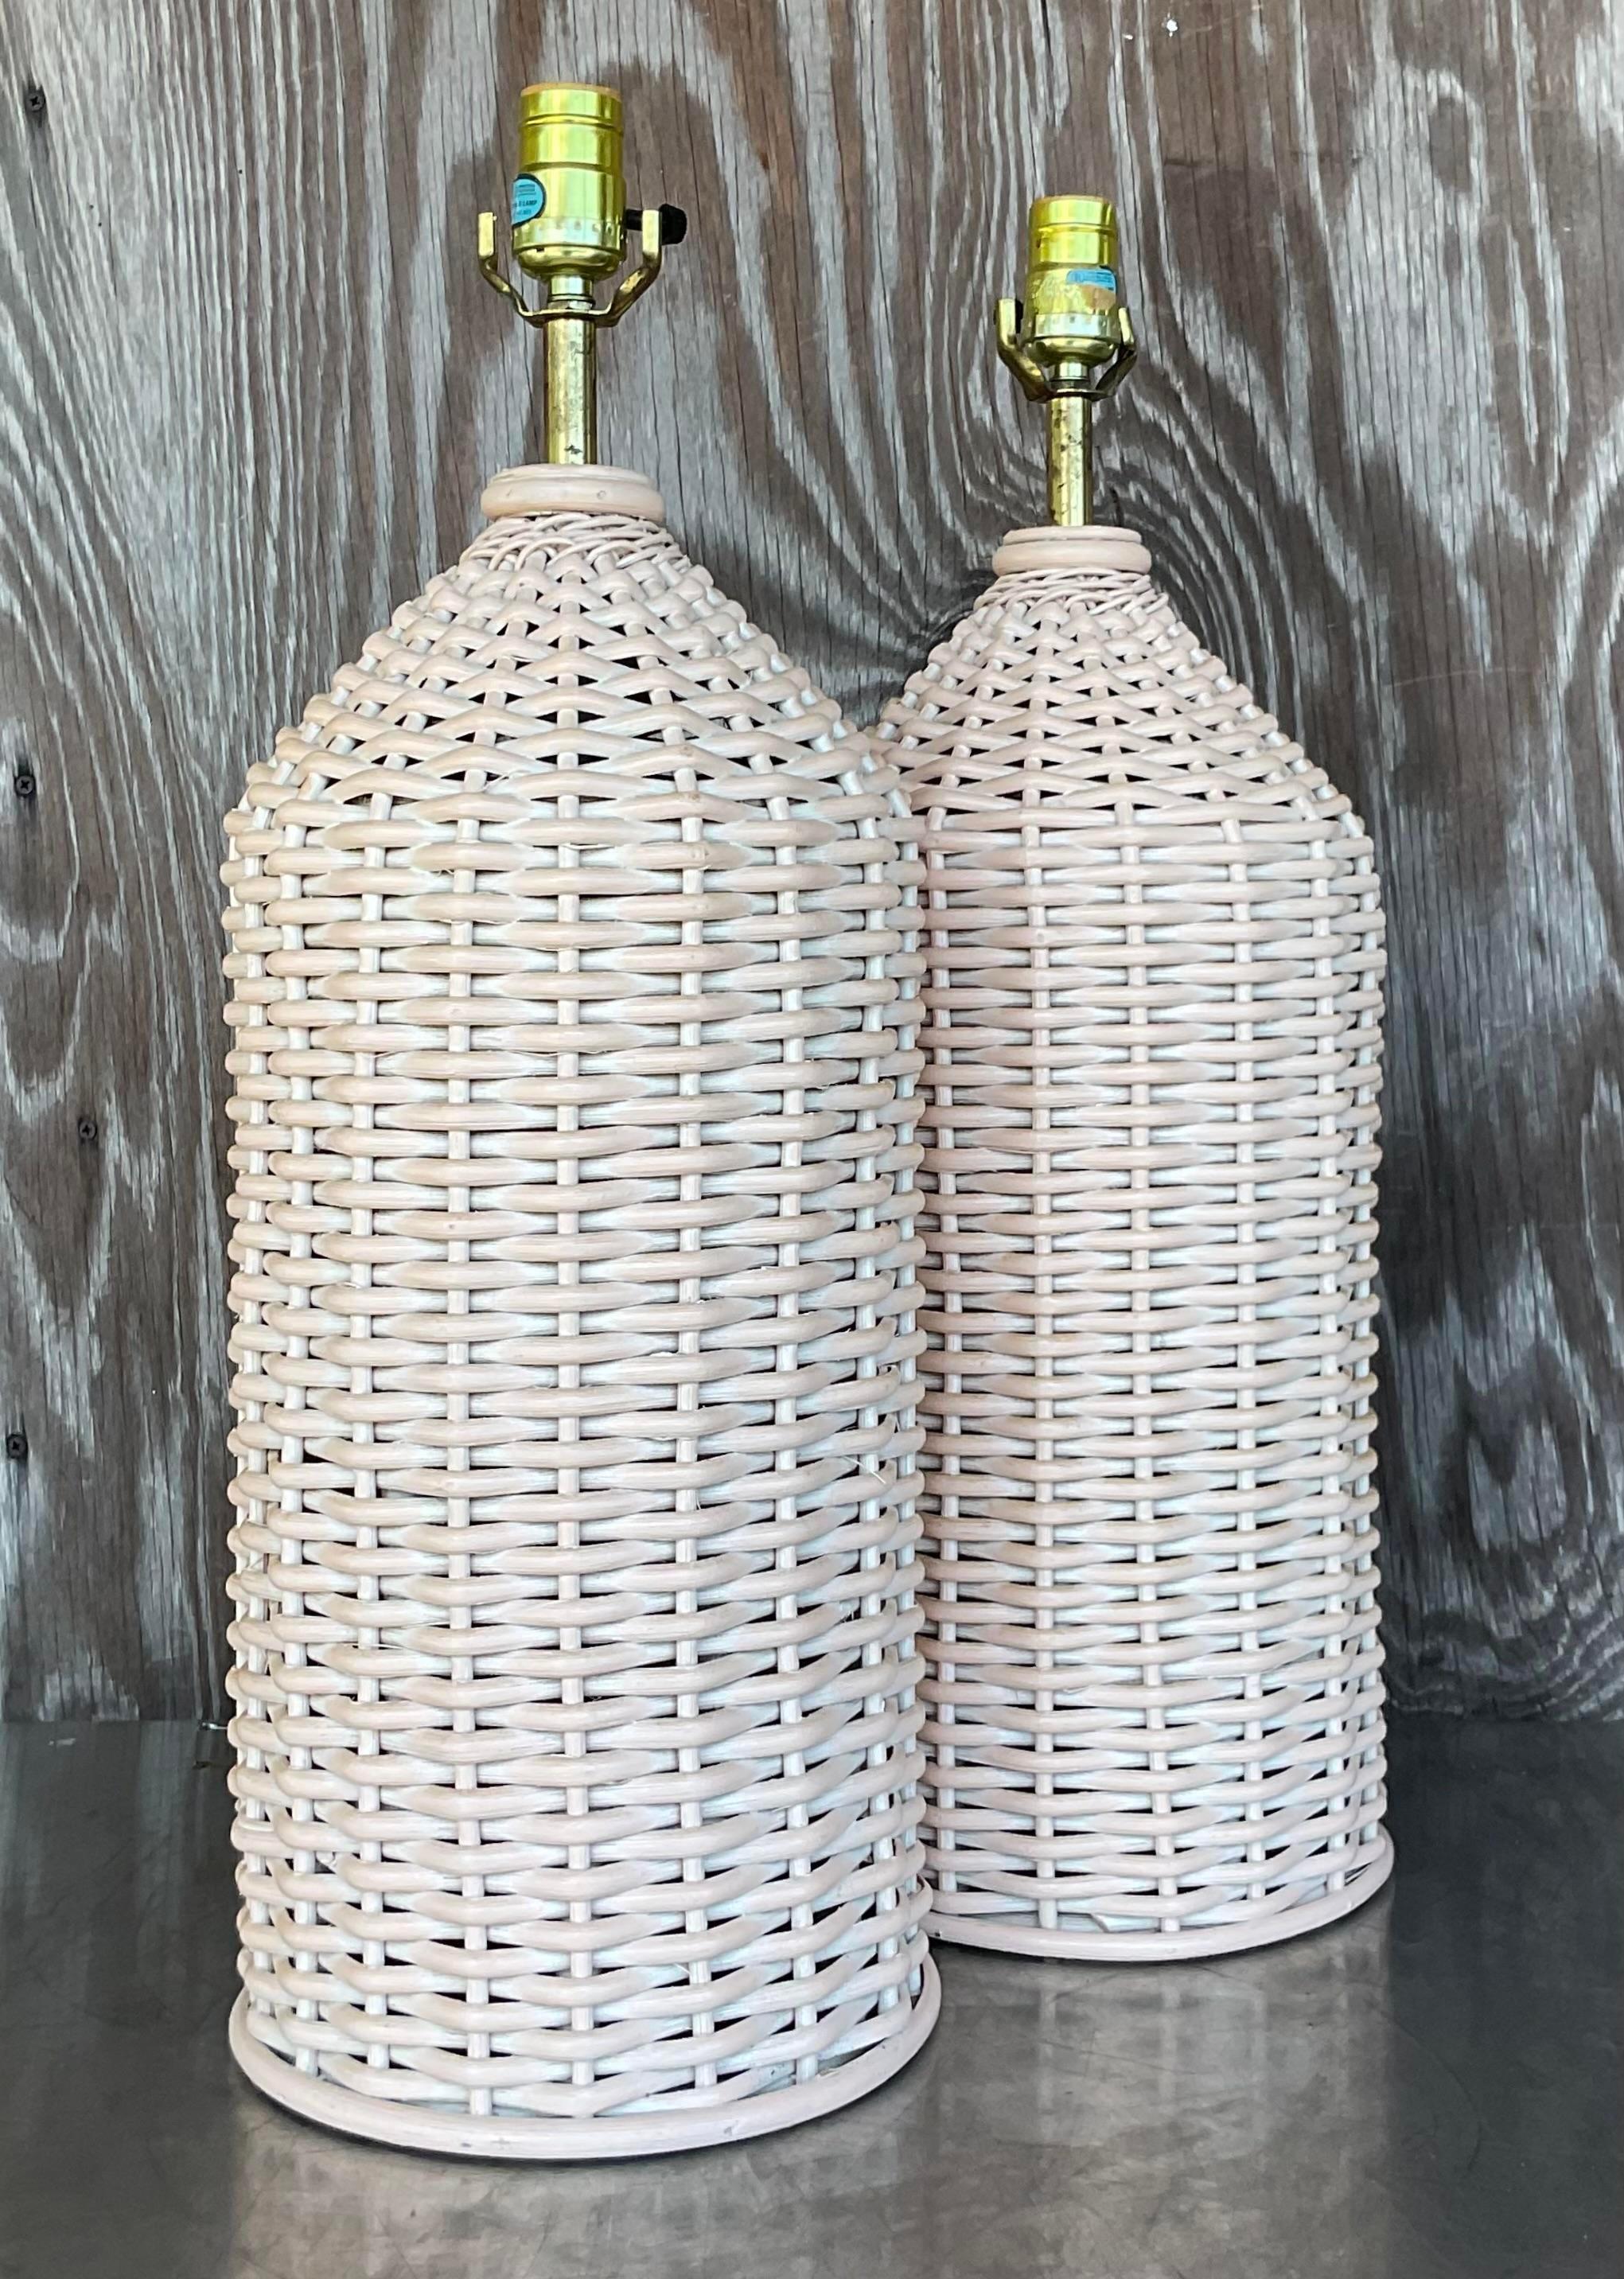 Philippine Vintage Coastal Woven Rattan Table Lamps - a Pair For Sale